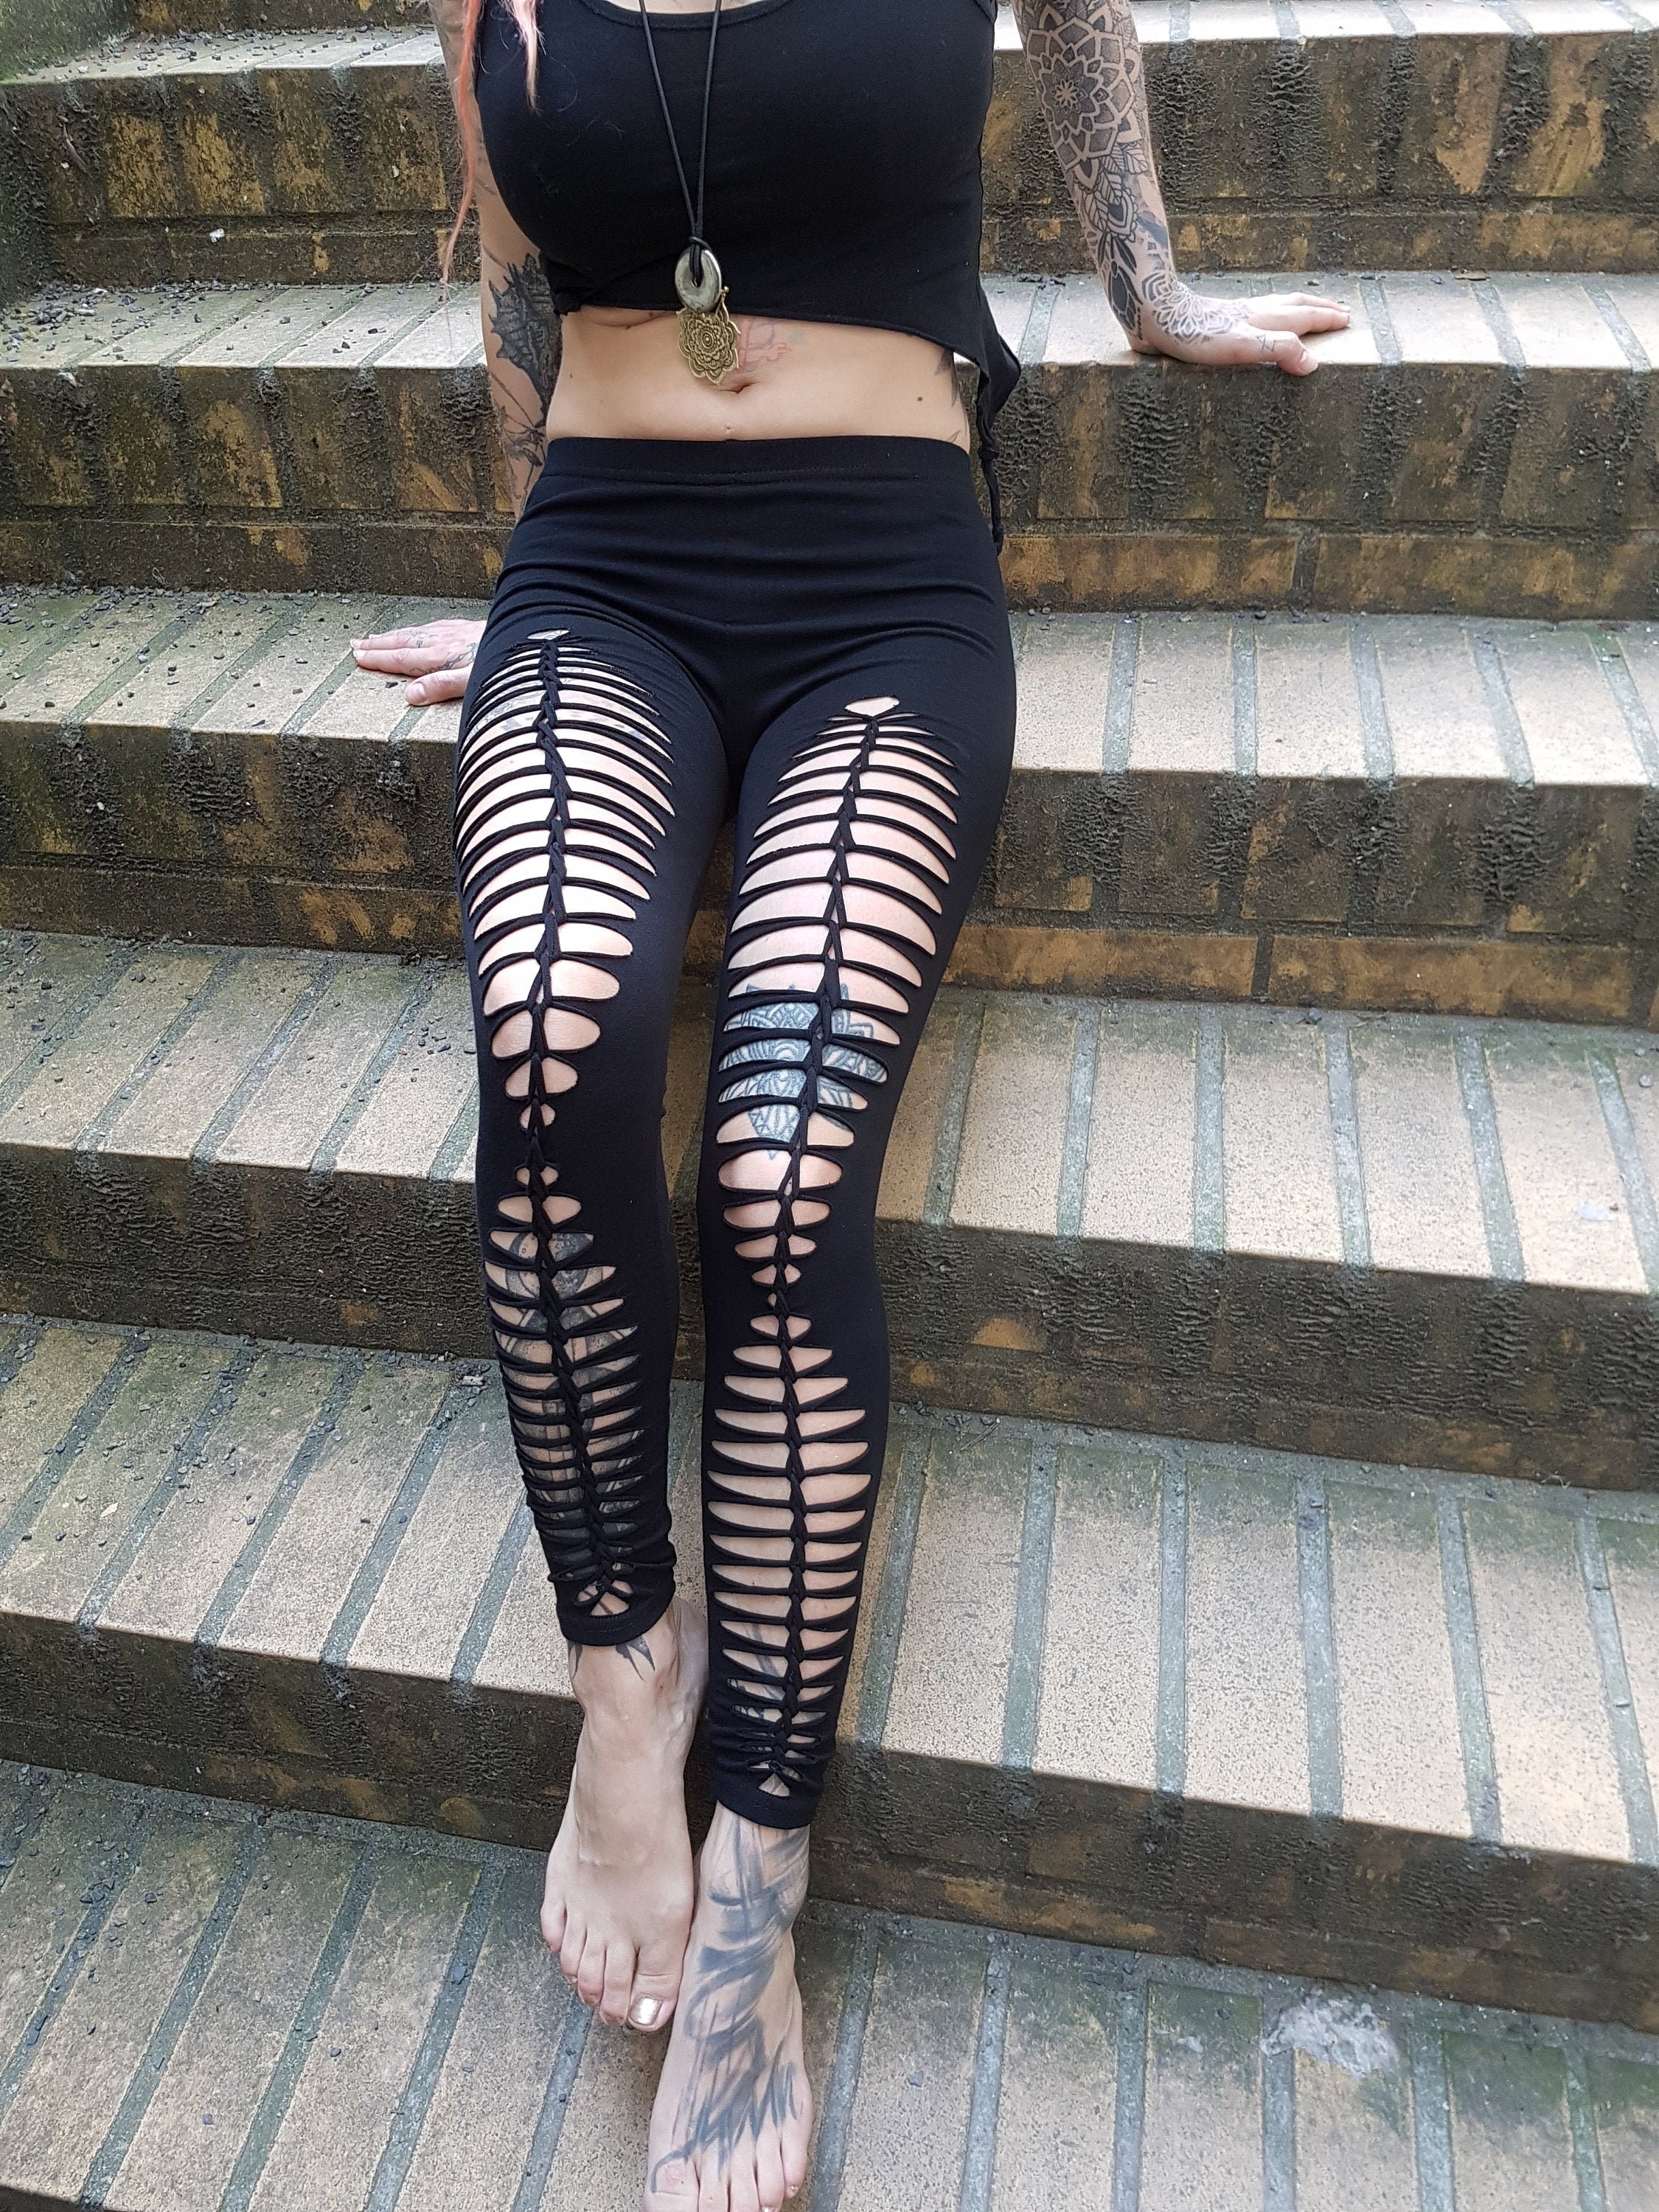 XXS-6XL Frontcut Leggings Black Cutouts Cut Out Goa Pixie Braided Psy  Burning Cosplay Yoga Lacing Geometric Pattern Rave Knotted 